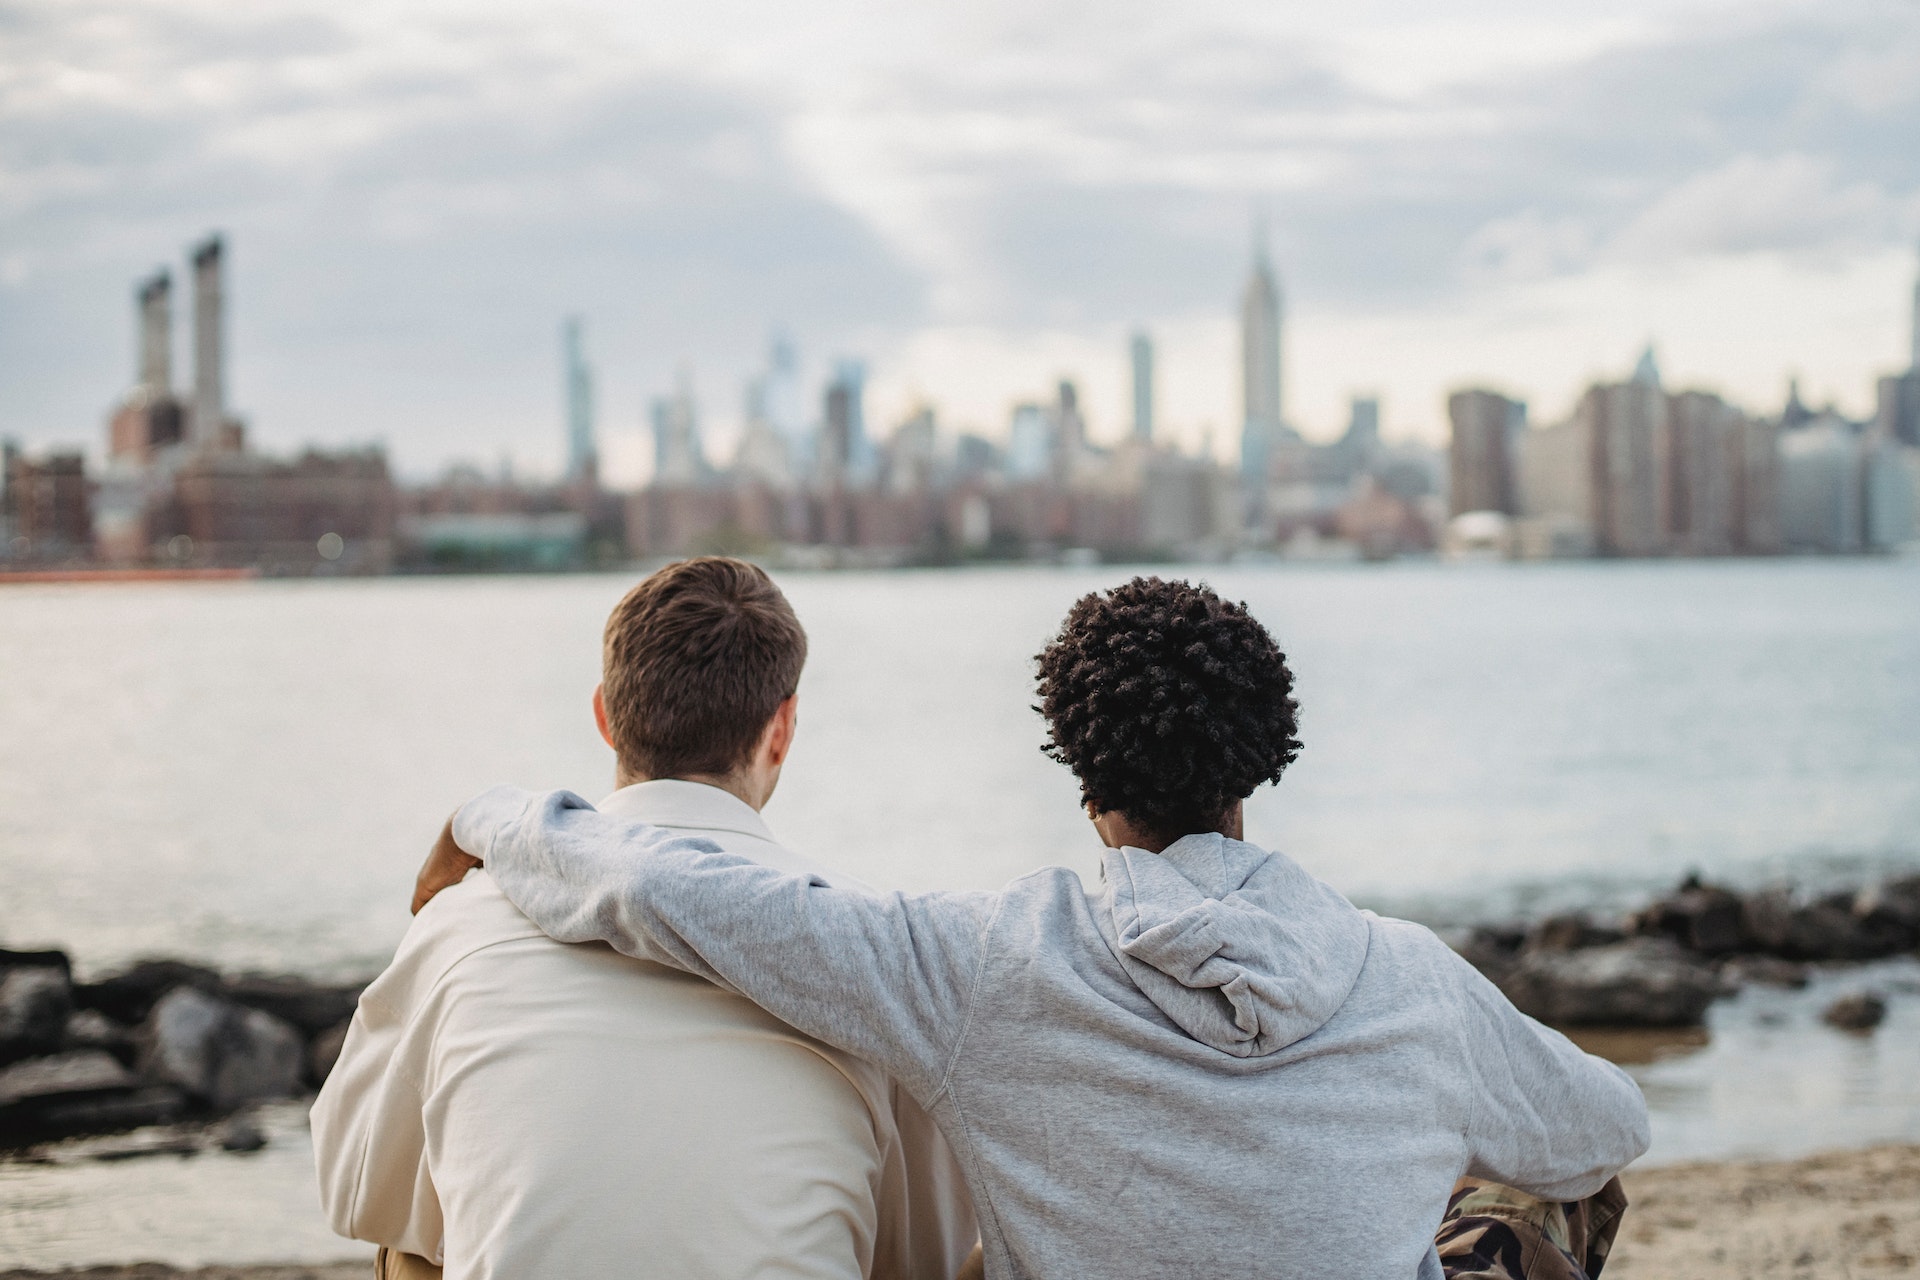 Two men looking at the skyline | Source: Pexels